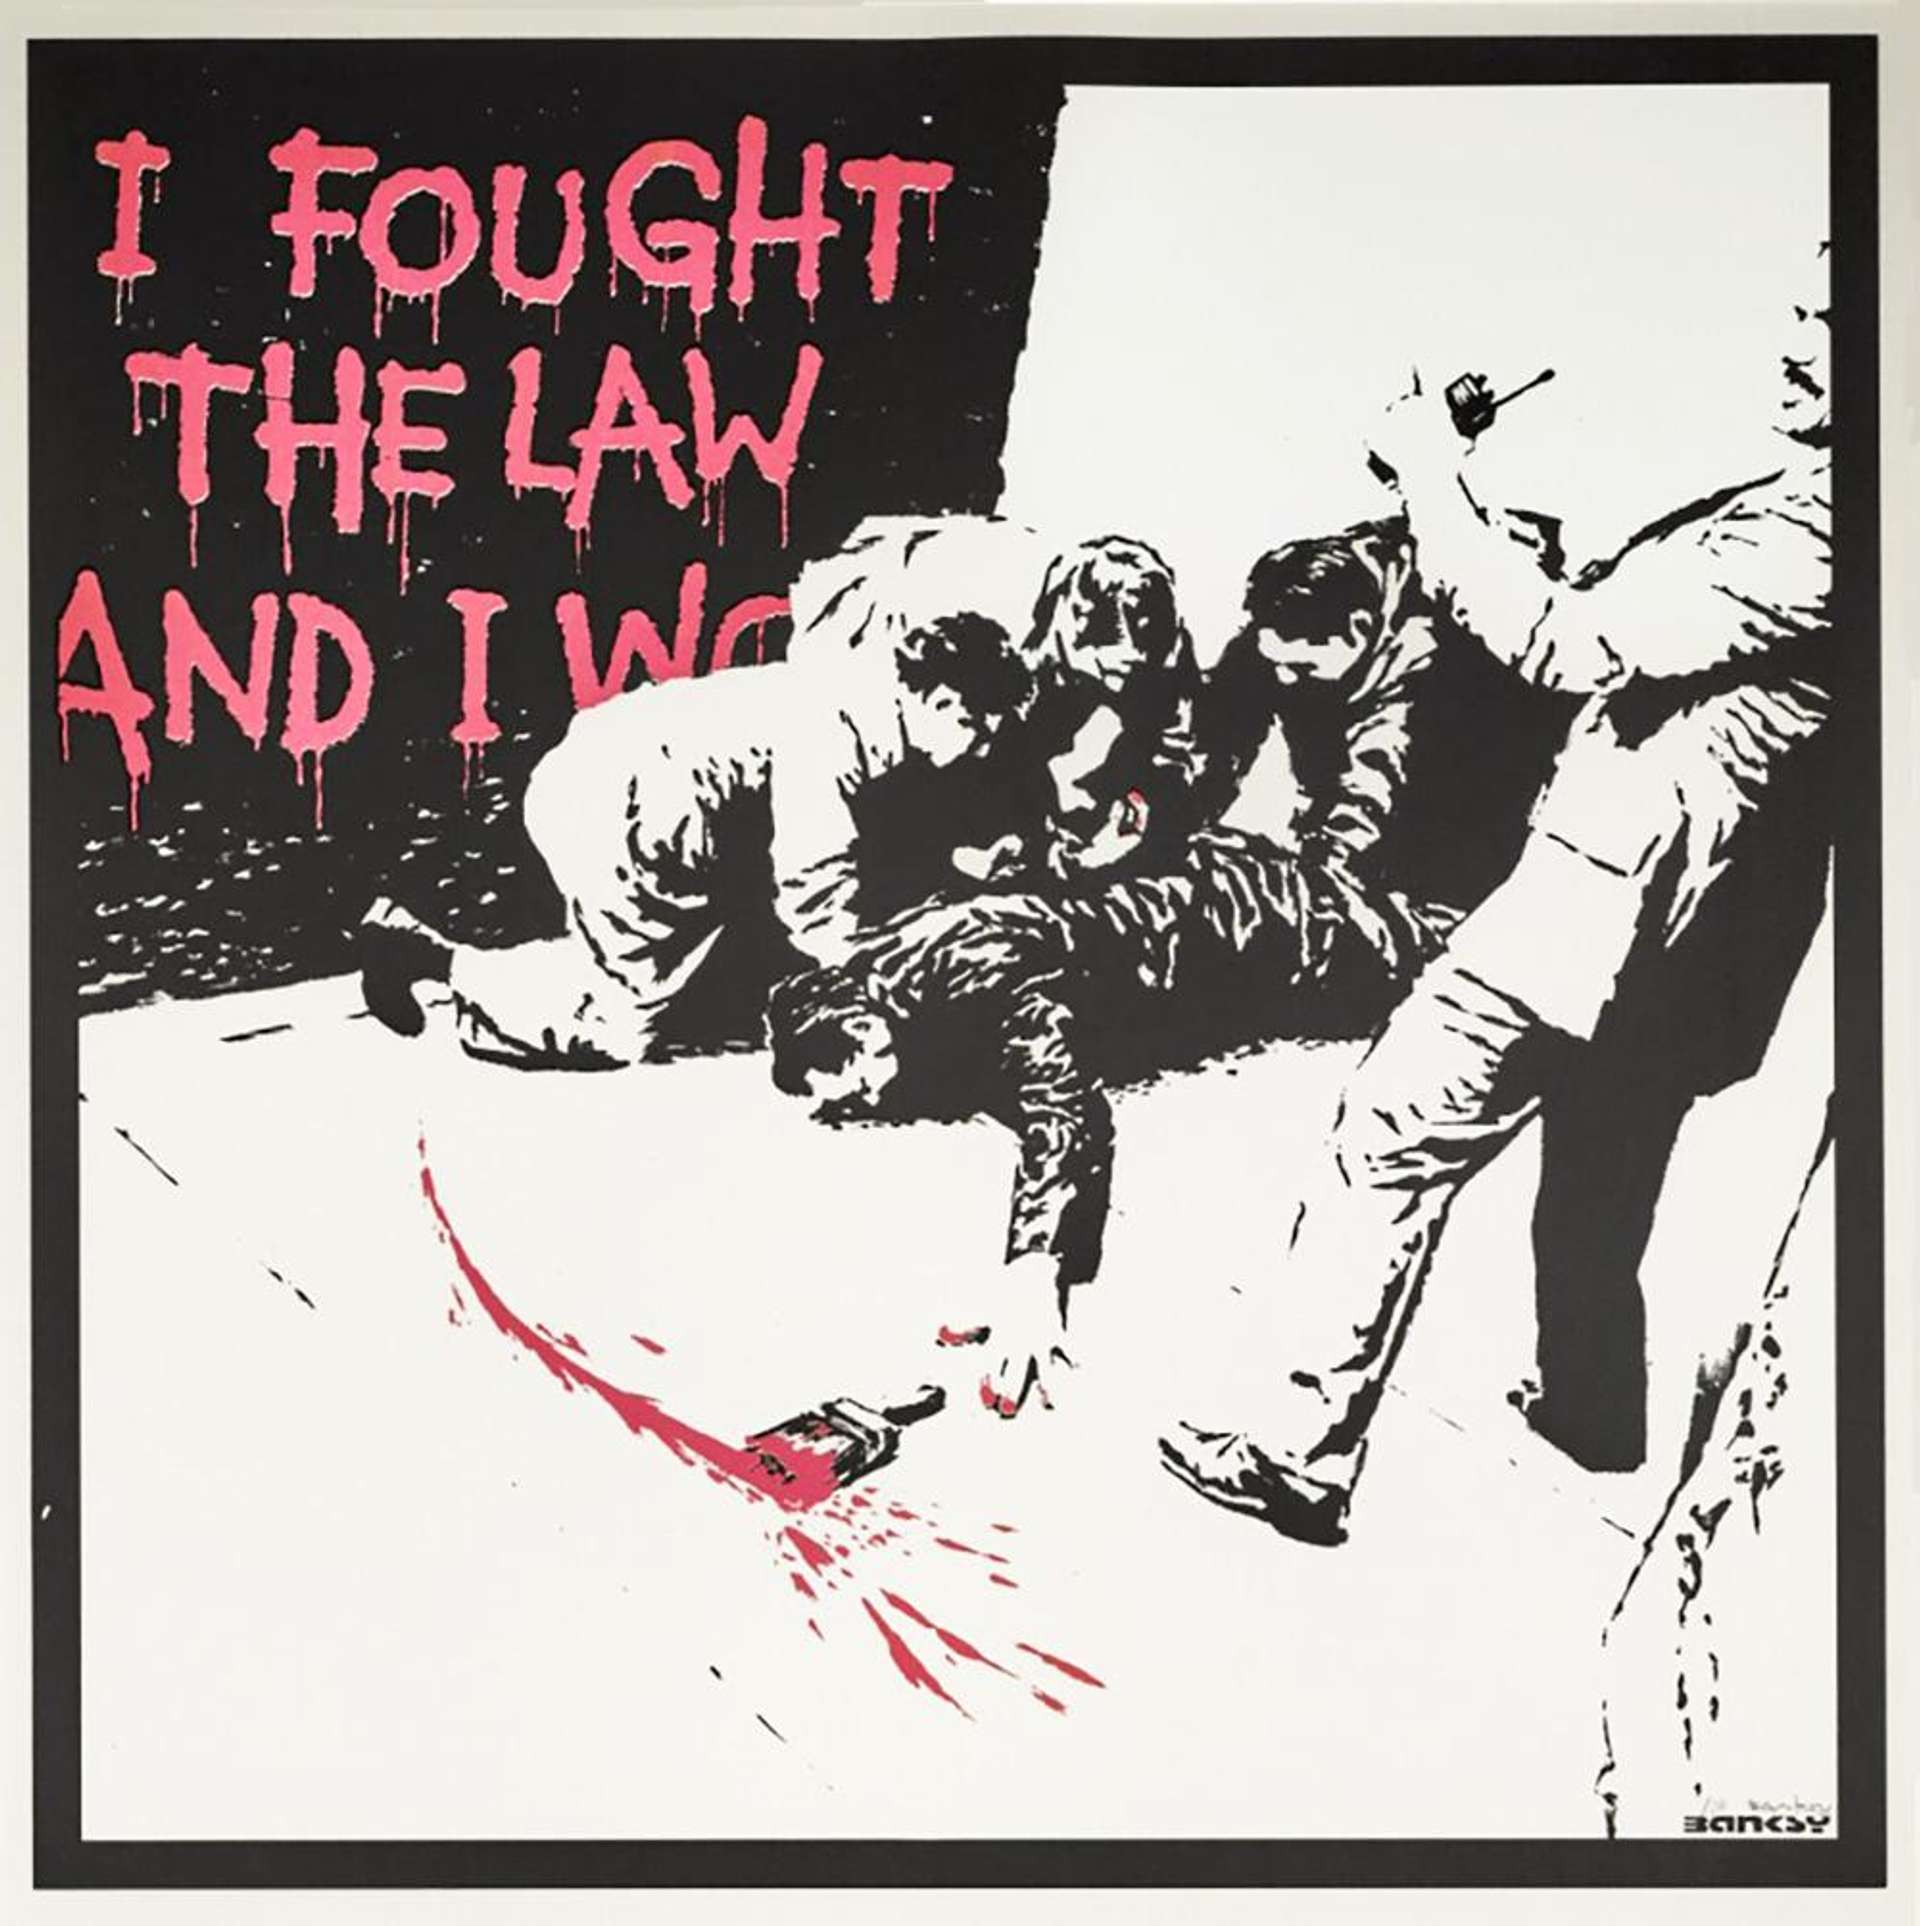 I Fought The Law (AP) - Signed Print by Banksy 2005 - MyArtBroker